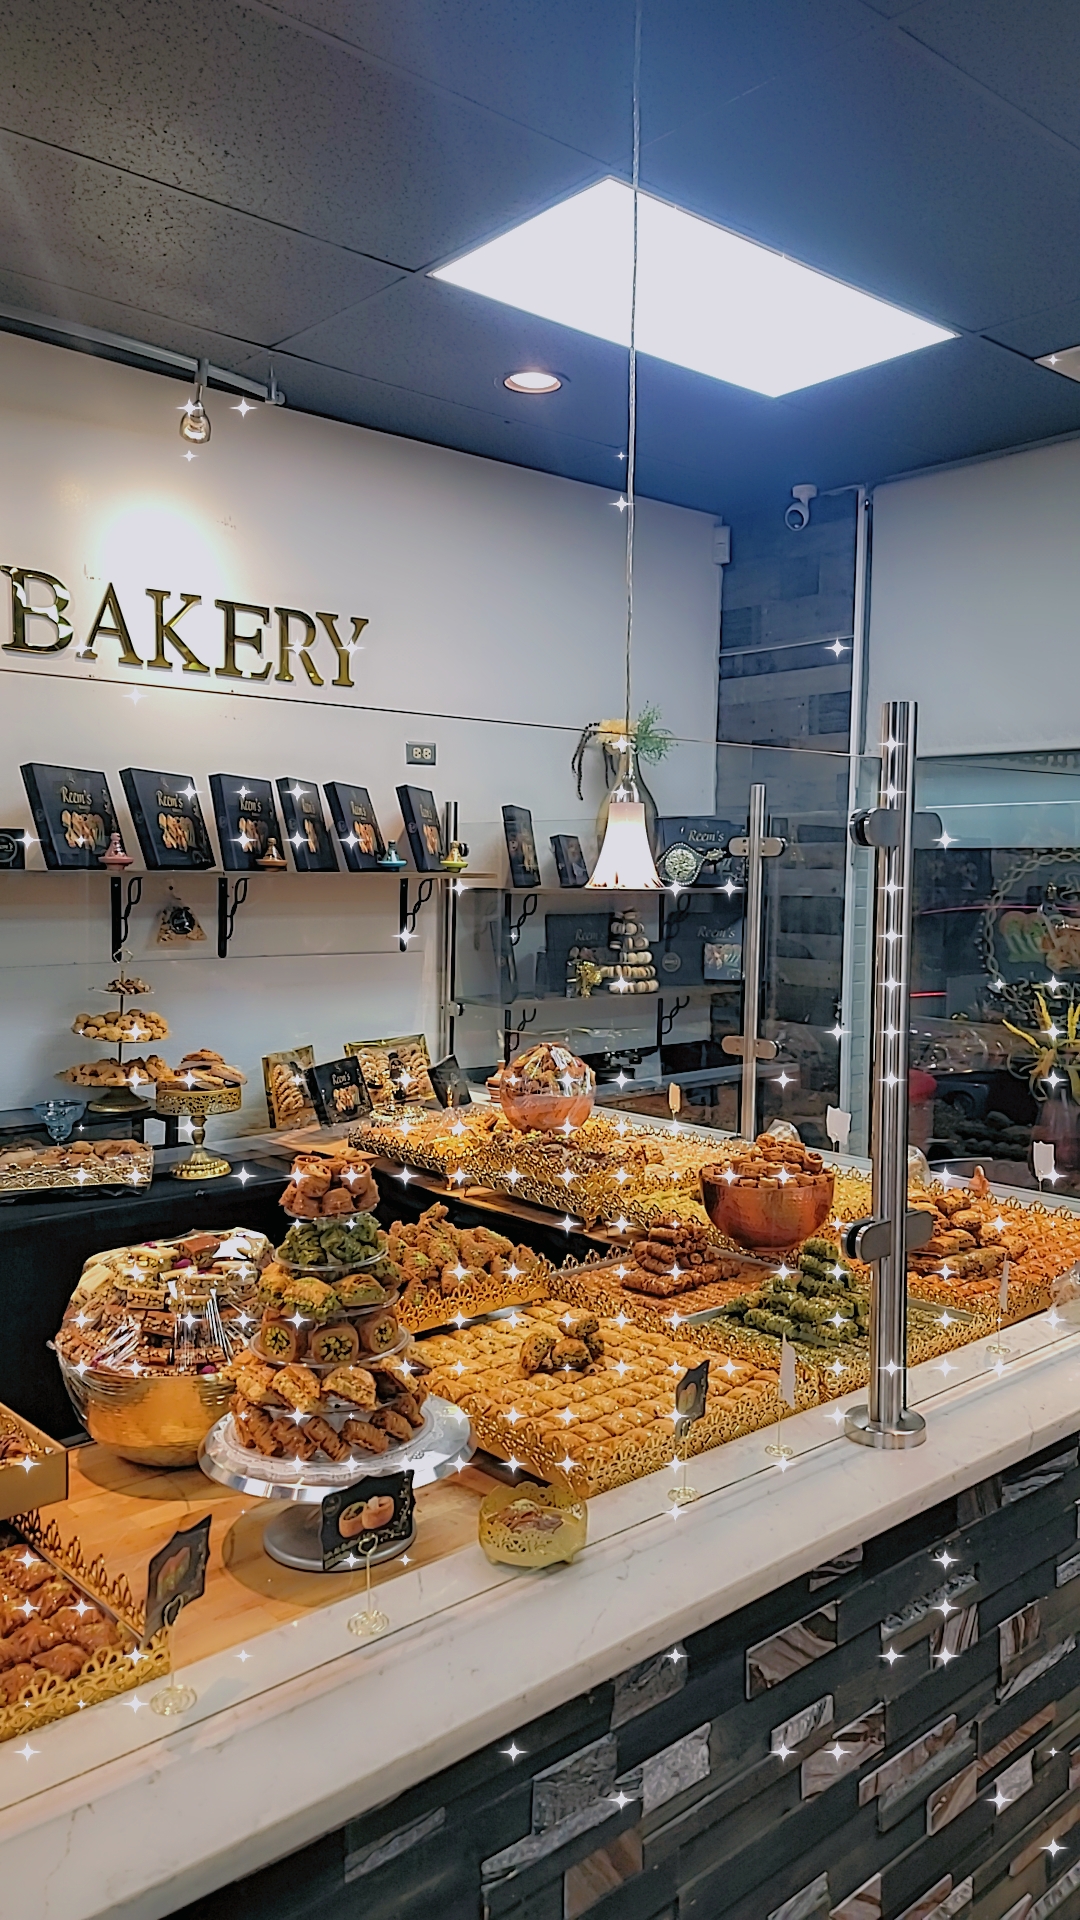 Reem's Bakery - Middle Eastern Syrian Sweets